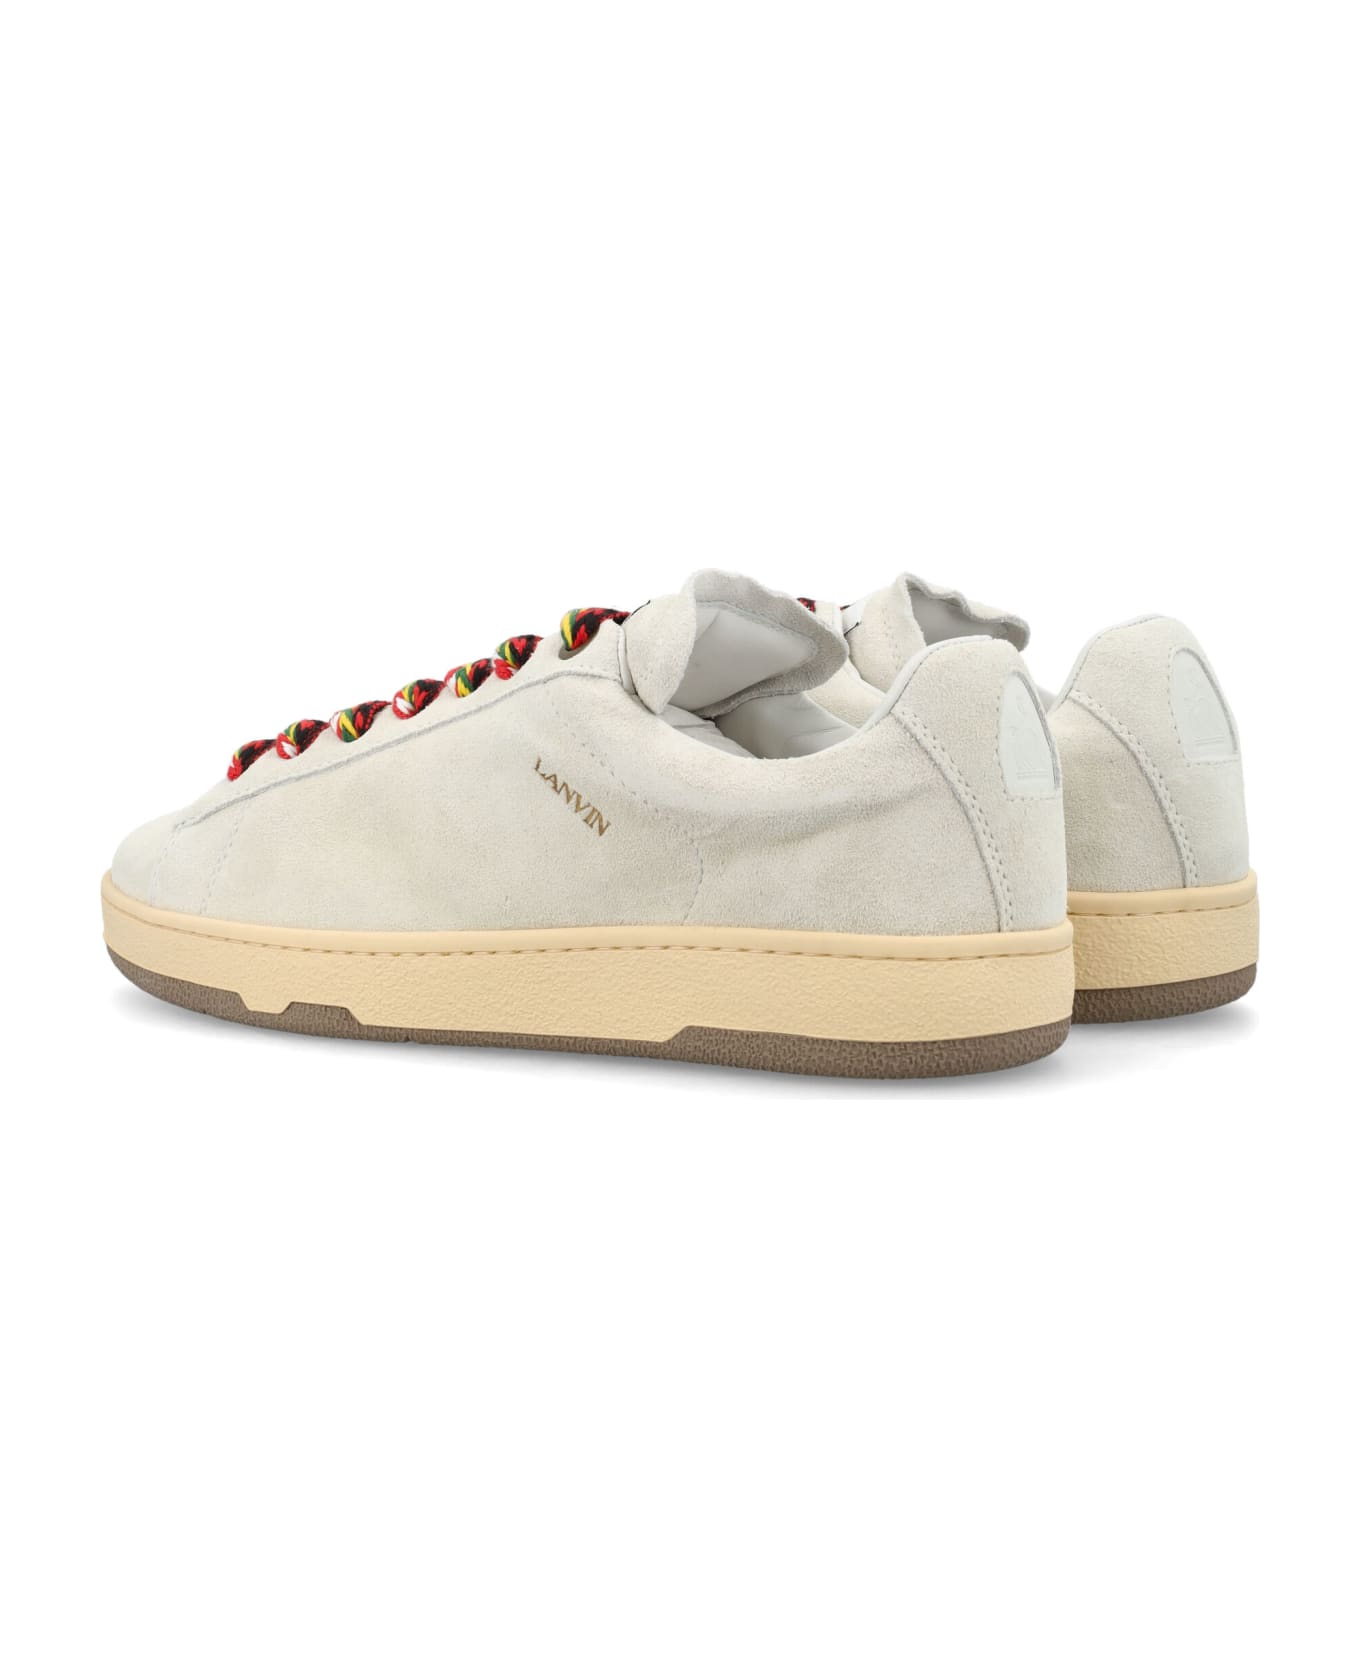 Lanvin Lite Curb Low Top Sneakers - WHITE スニーカー